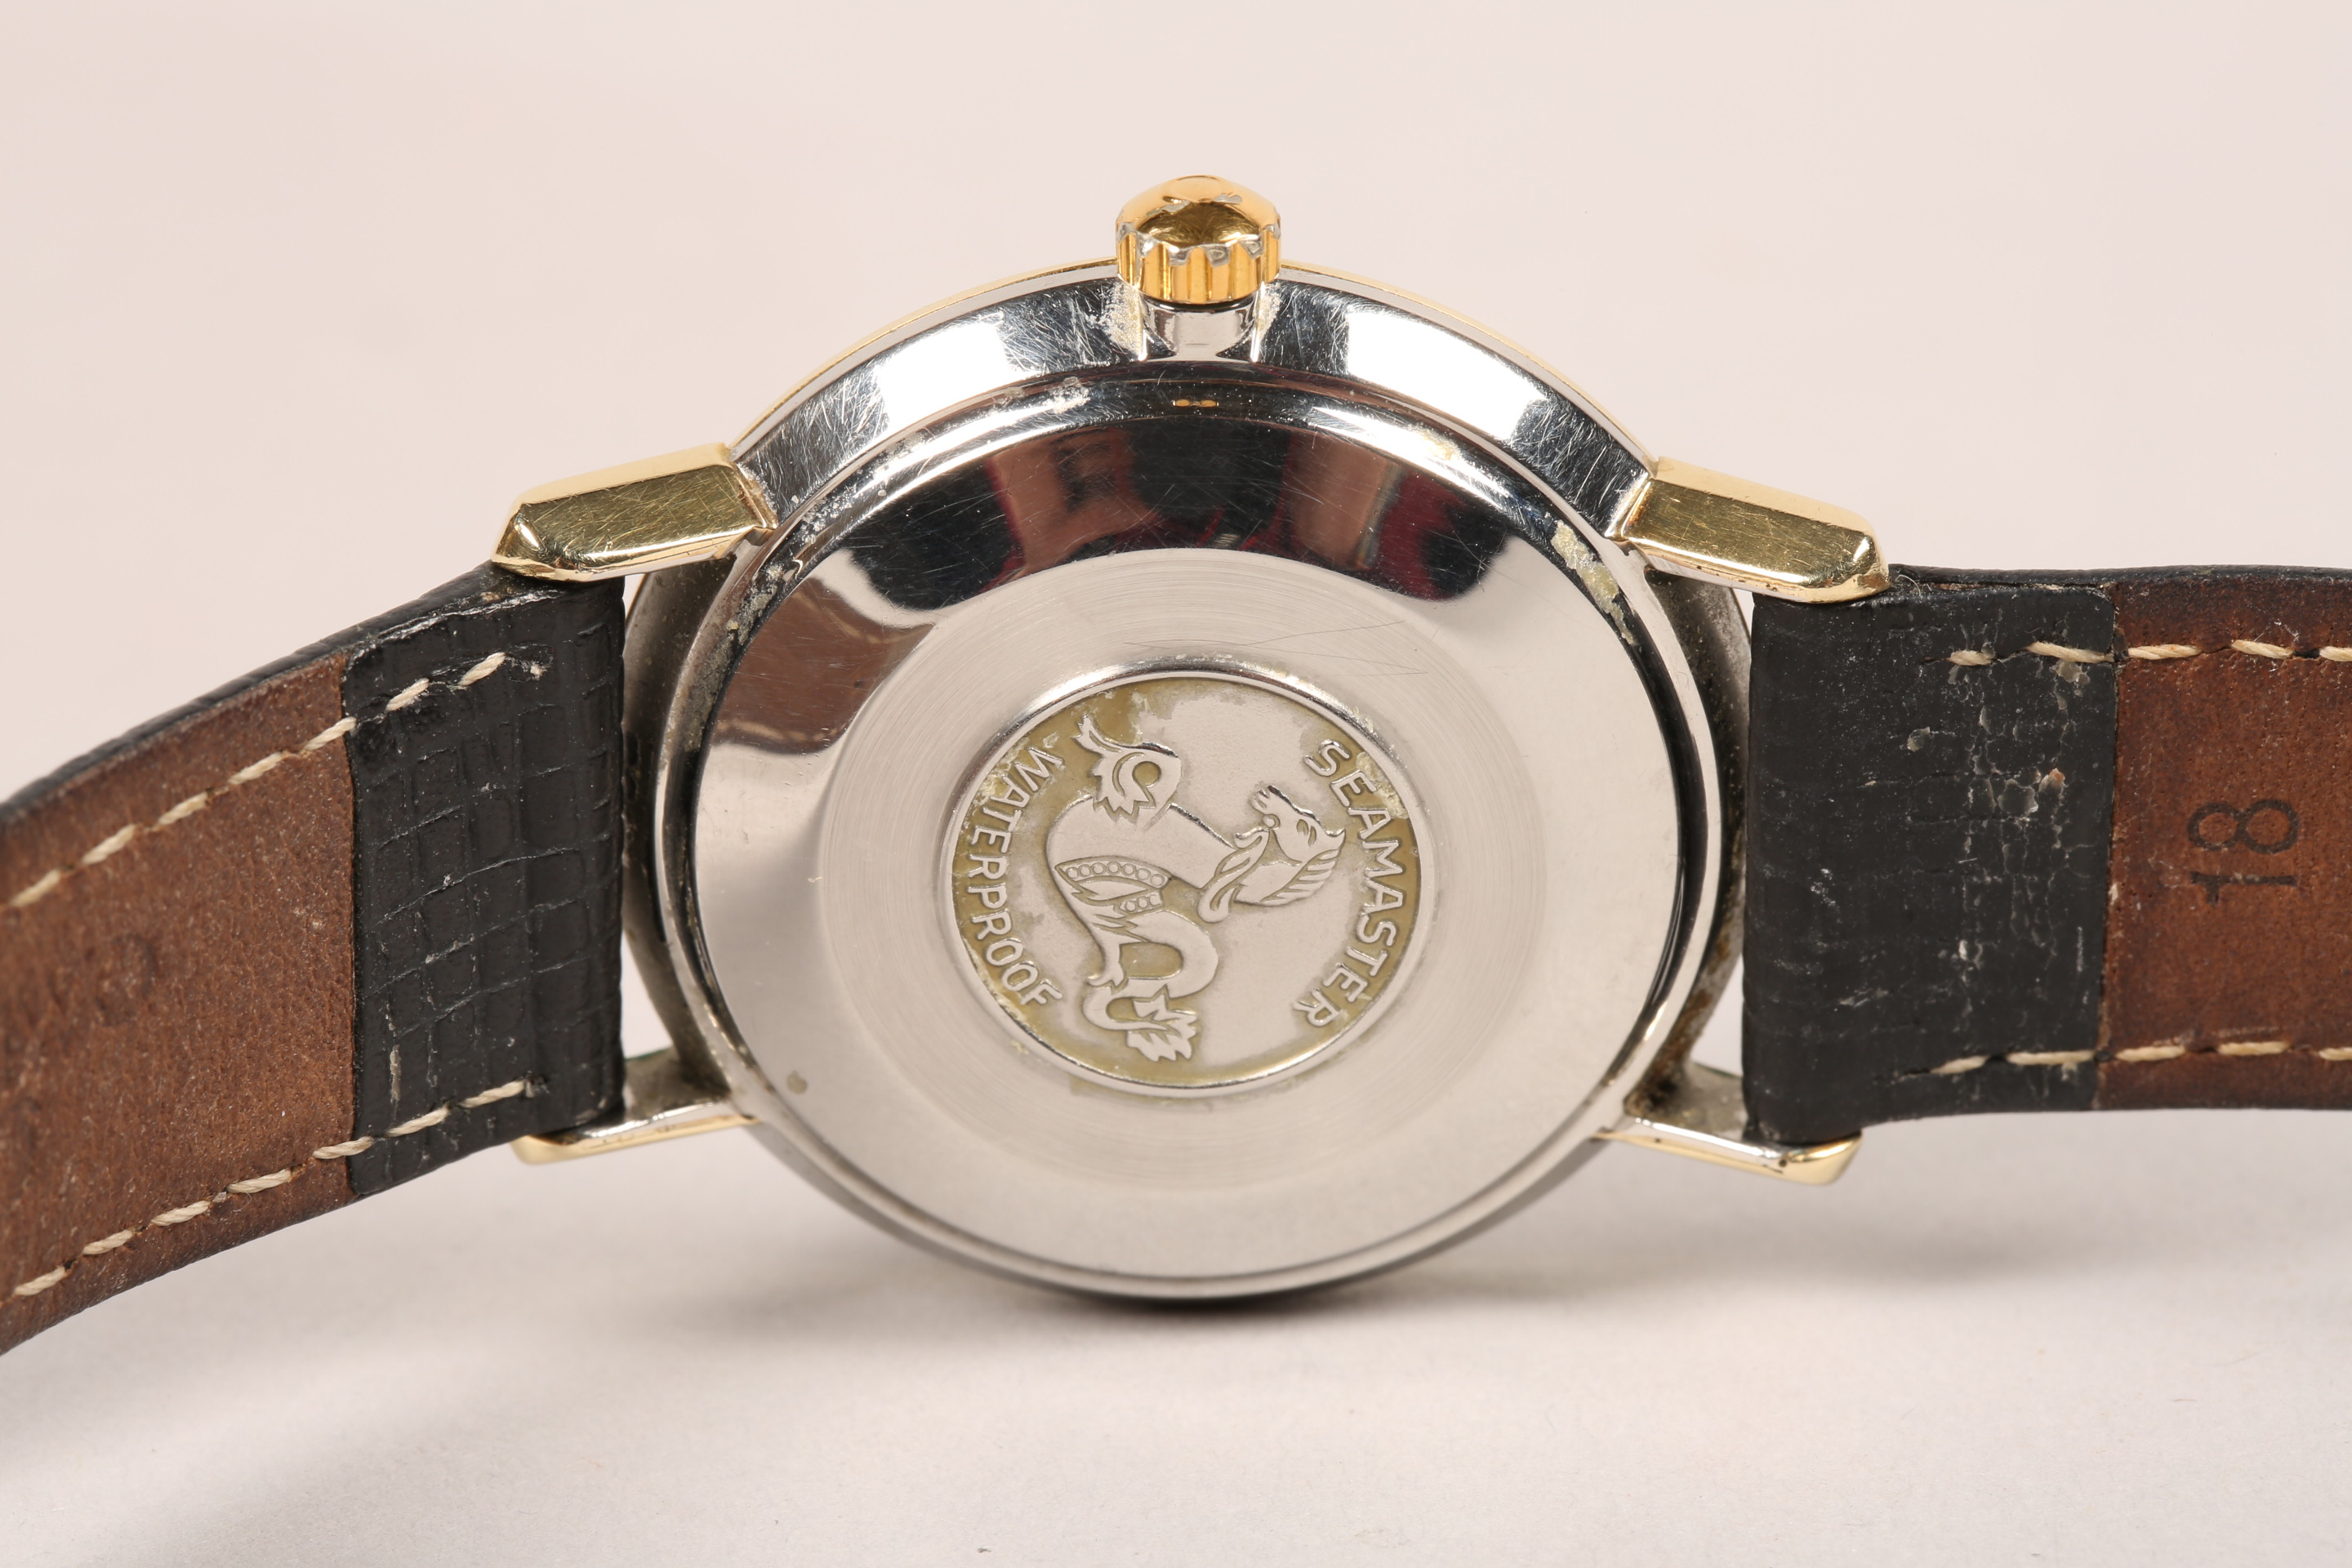 Gents Omega automatic Seamaster deville wrist watch, with black dial and date aperture on black - Image 5 of 6